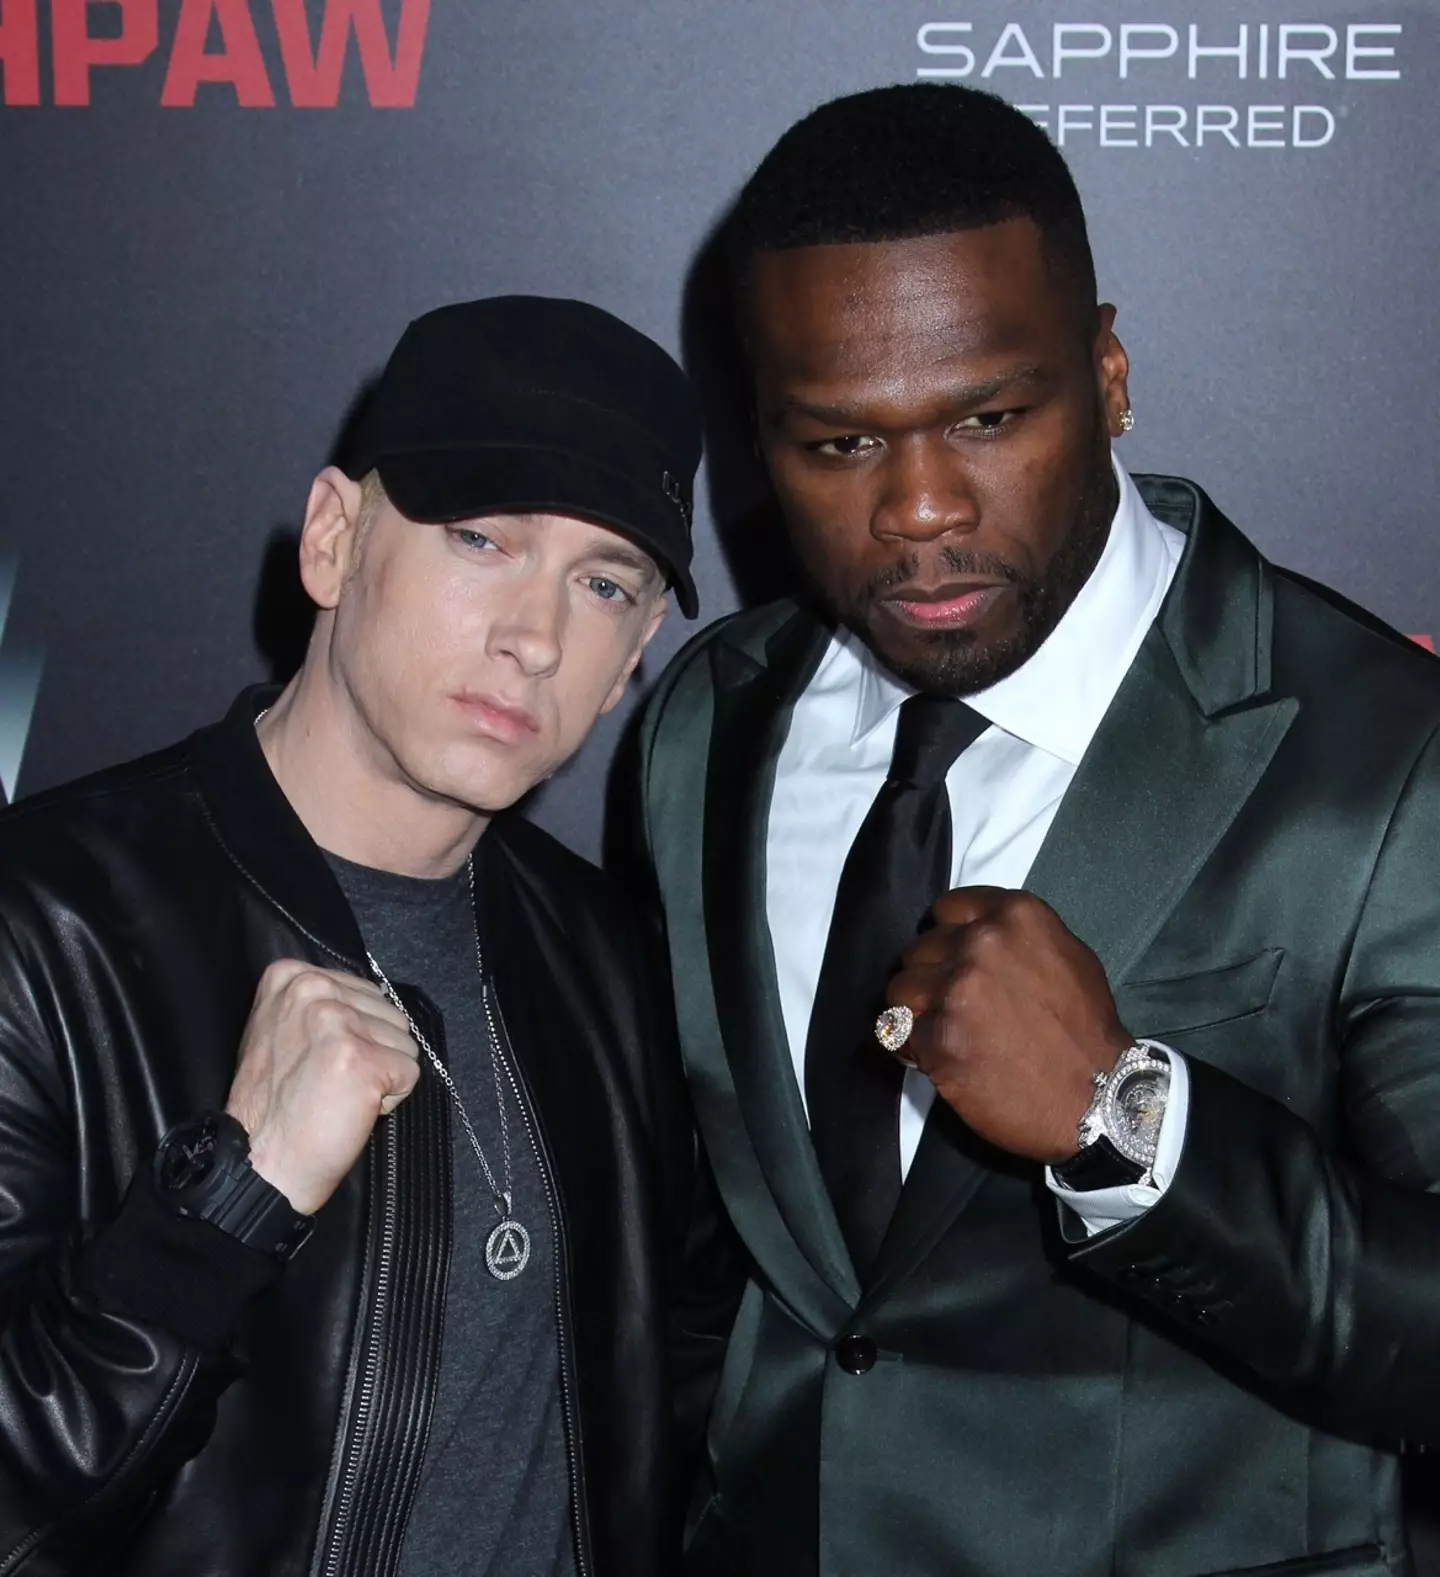 Without Eminem, there wouldn't be a 50 Cent. But without 50 Cent, Eminem might not have made it this far.